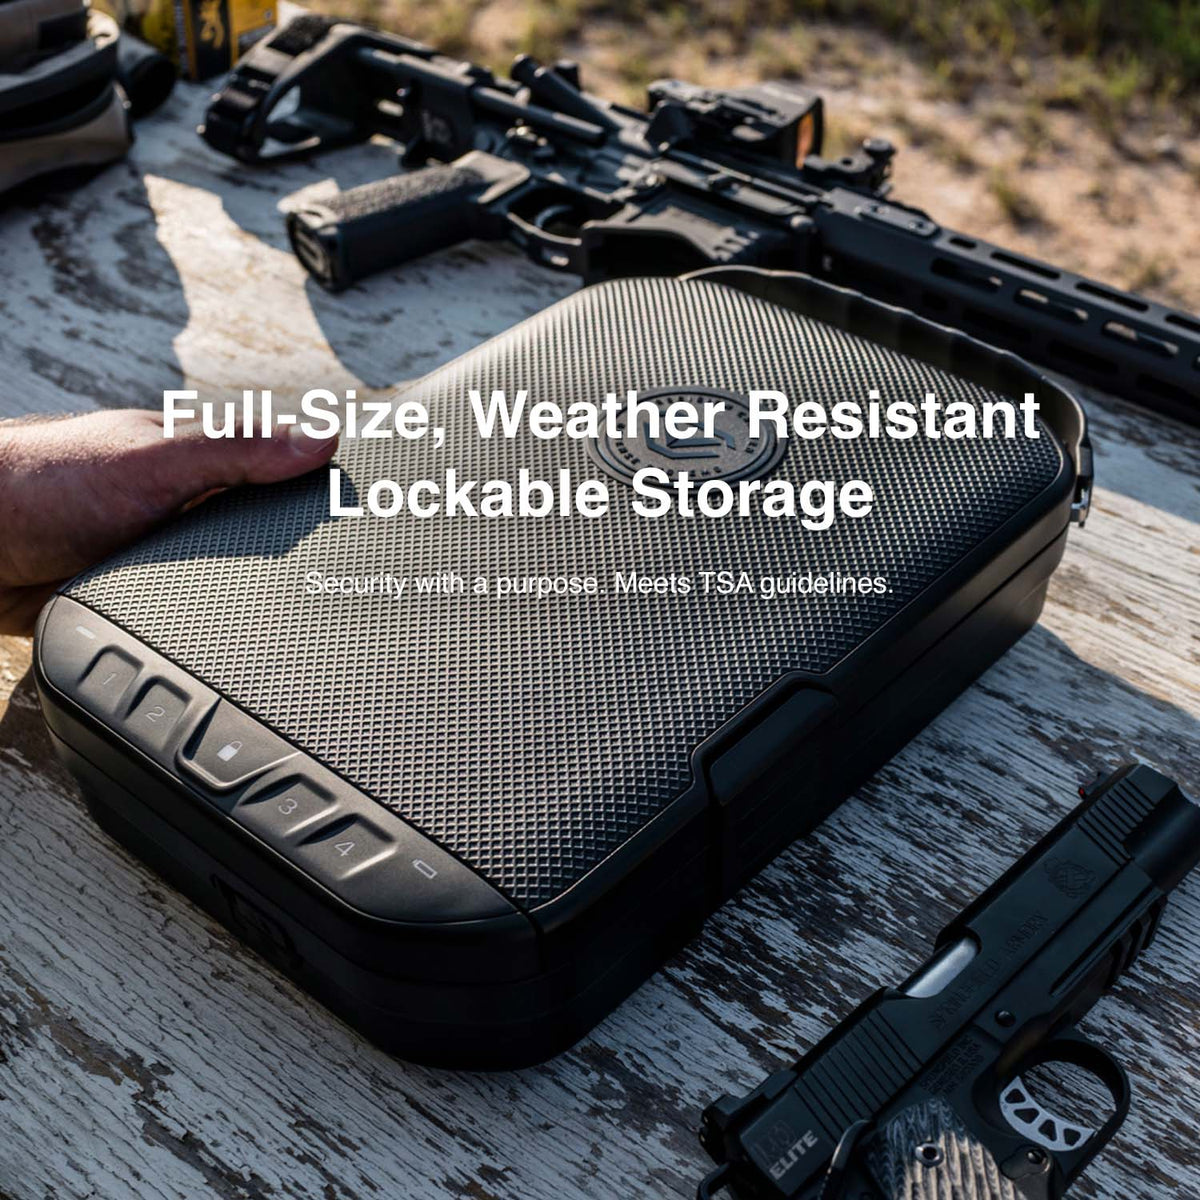 Vaultek - LifePod 2.0 Full-Size Secure Weather Resistant Biometric and Keypad Gun Safe with Built-in Lock System